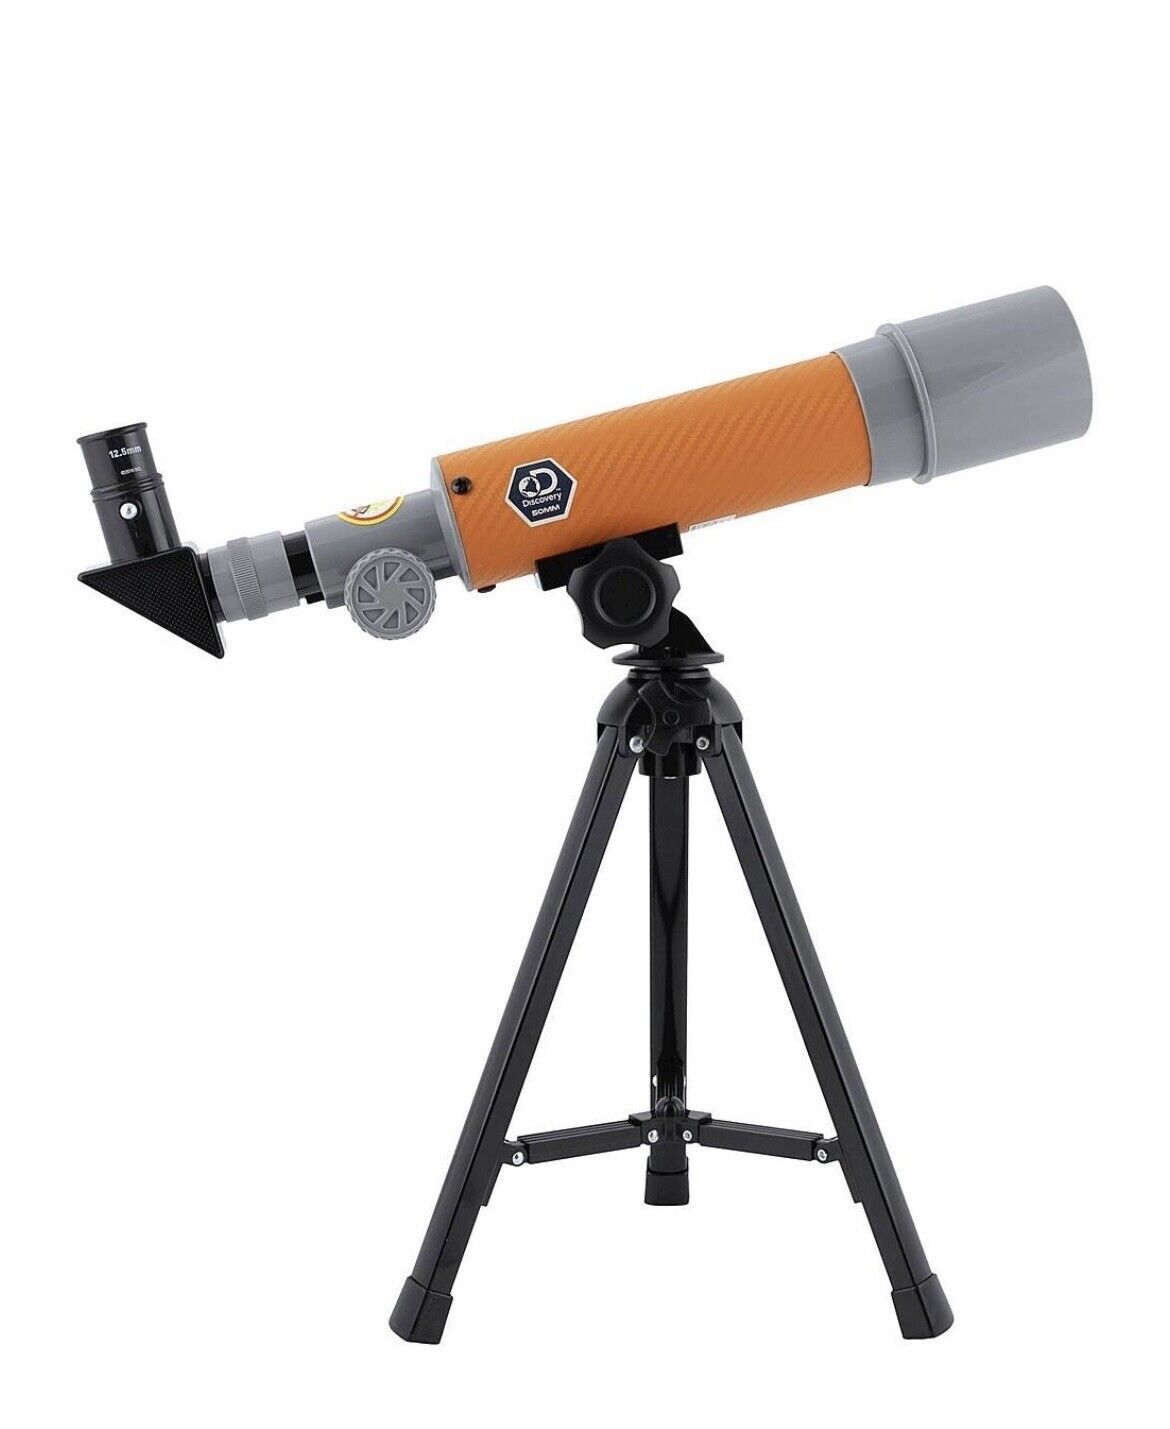 Telescope for Kids Discovery Juno 50MM Brand New 